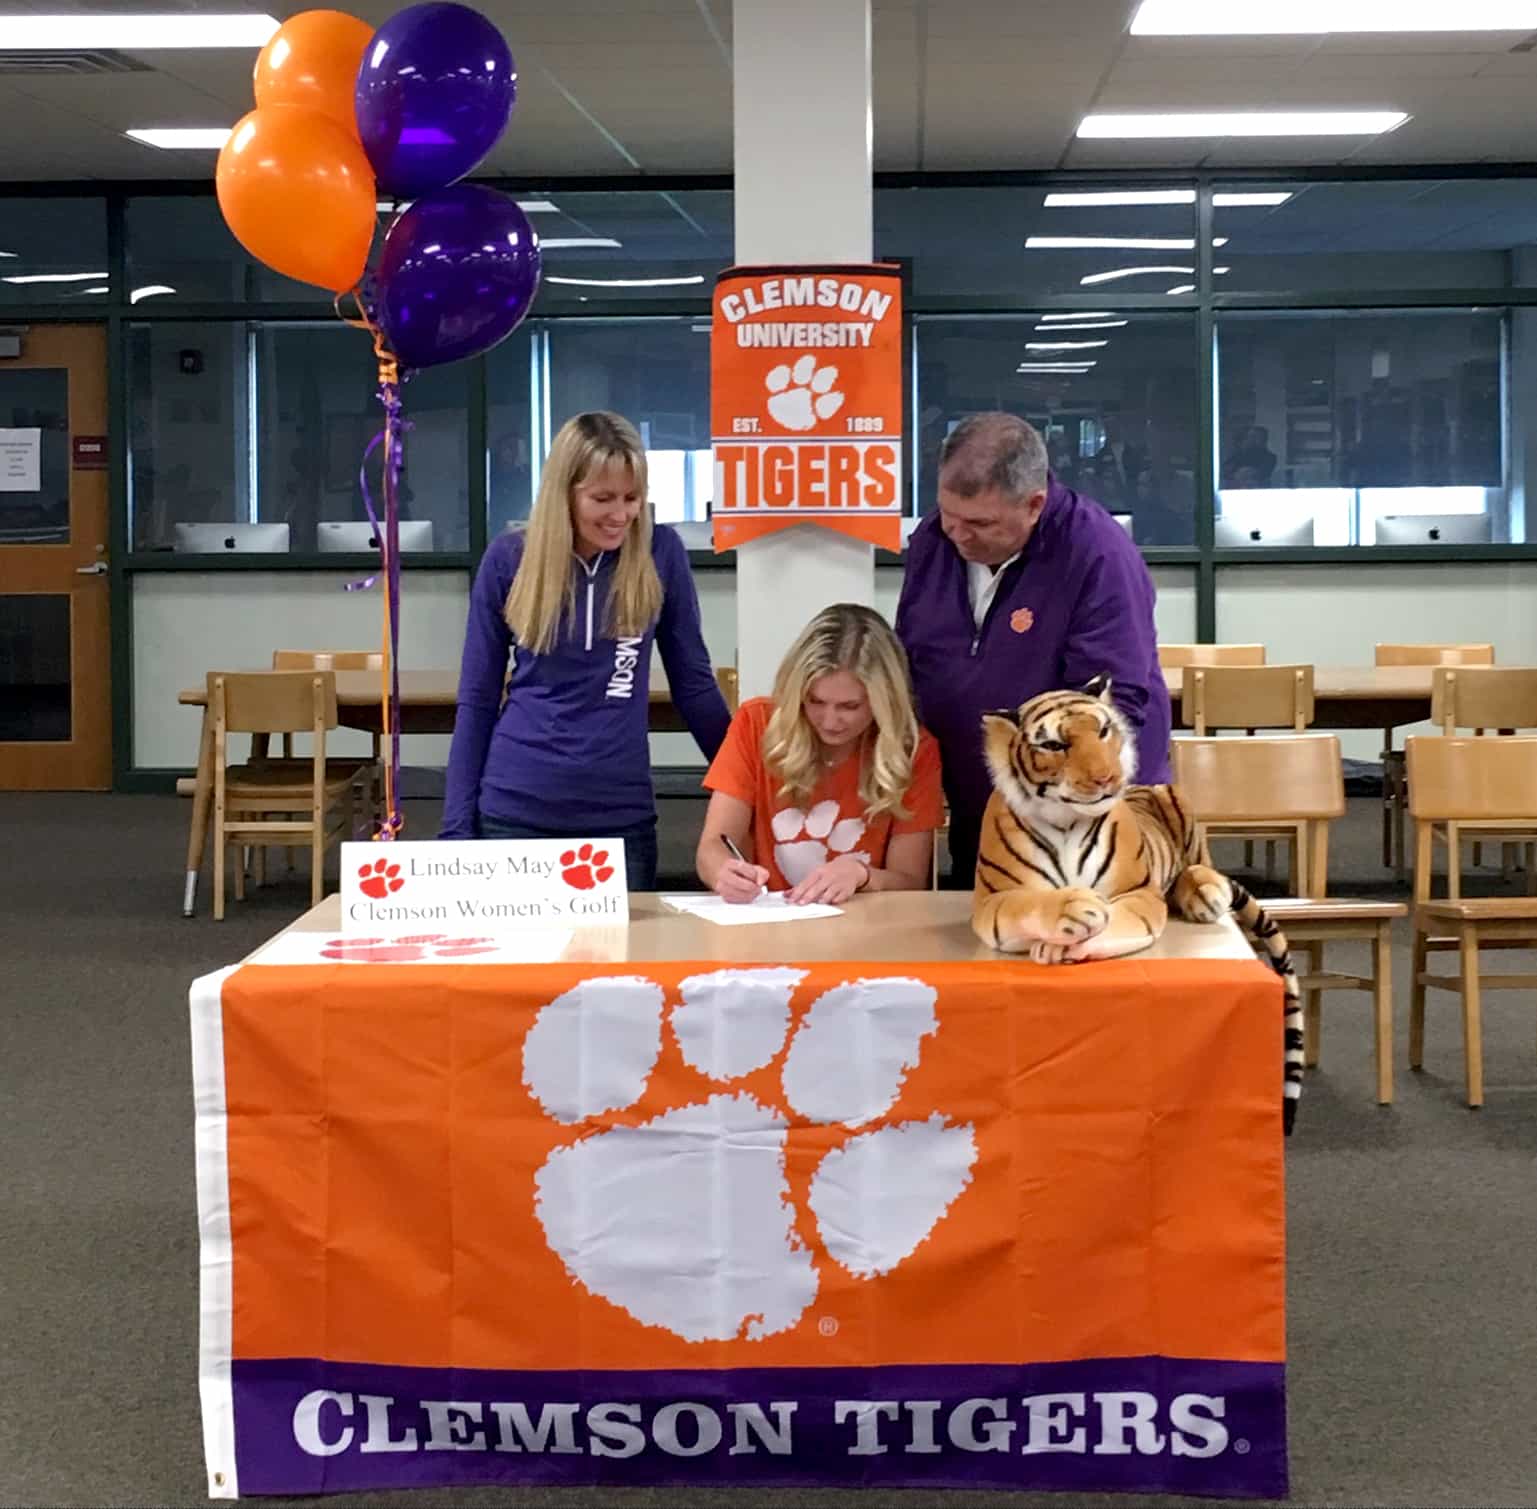 Lindsay May signs with Clemson